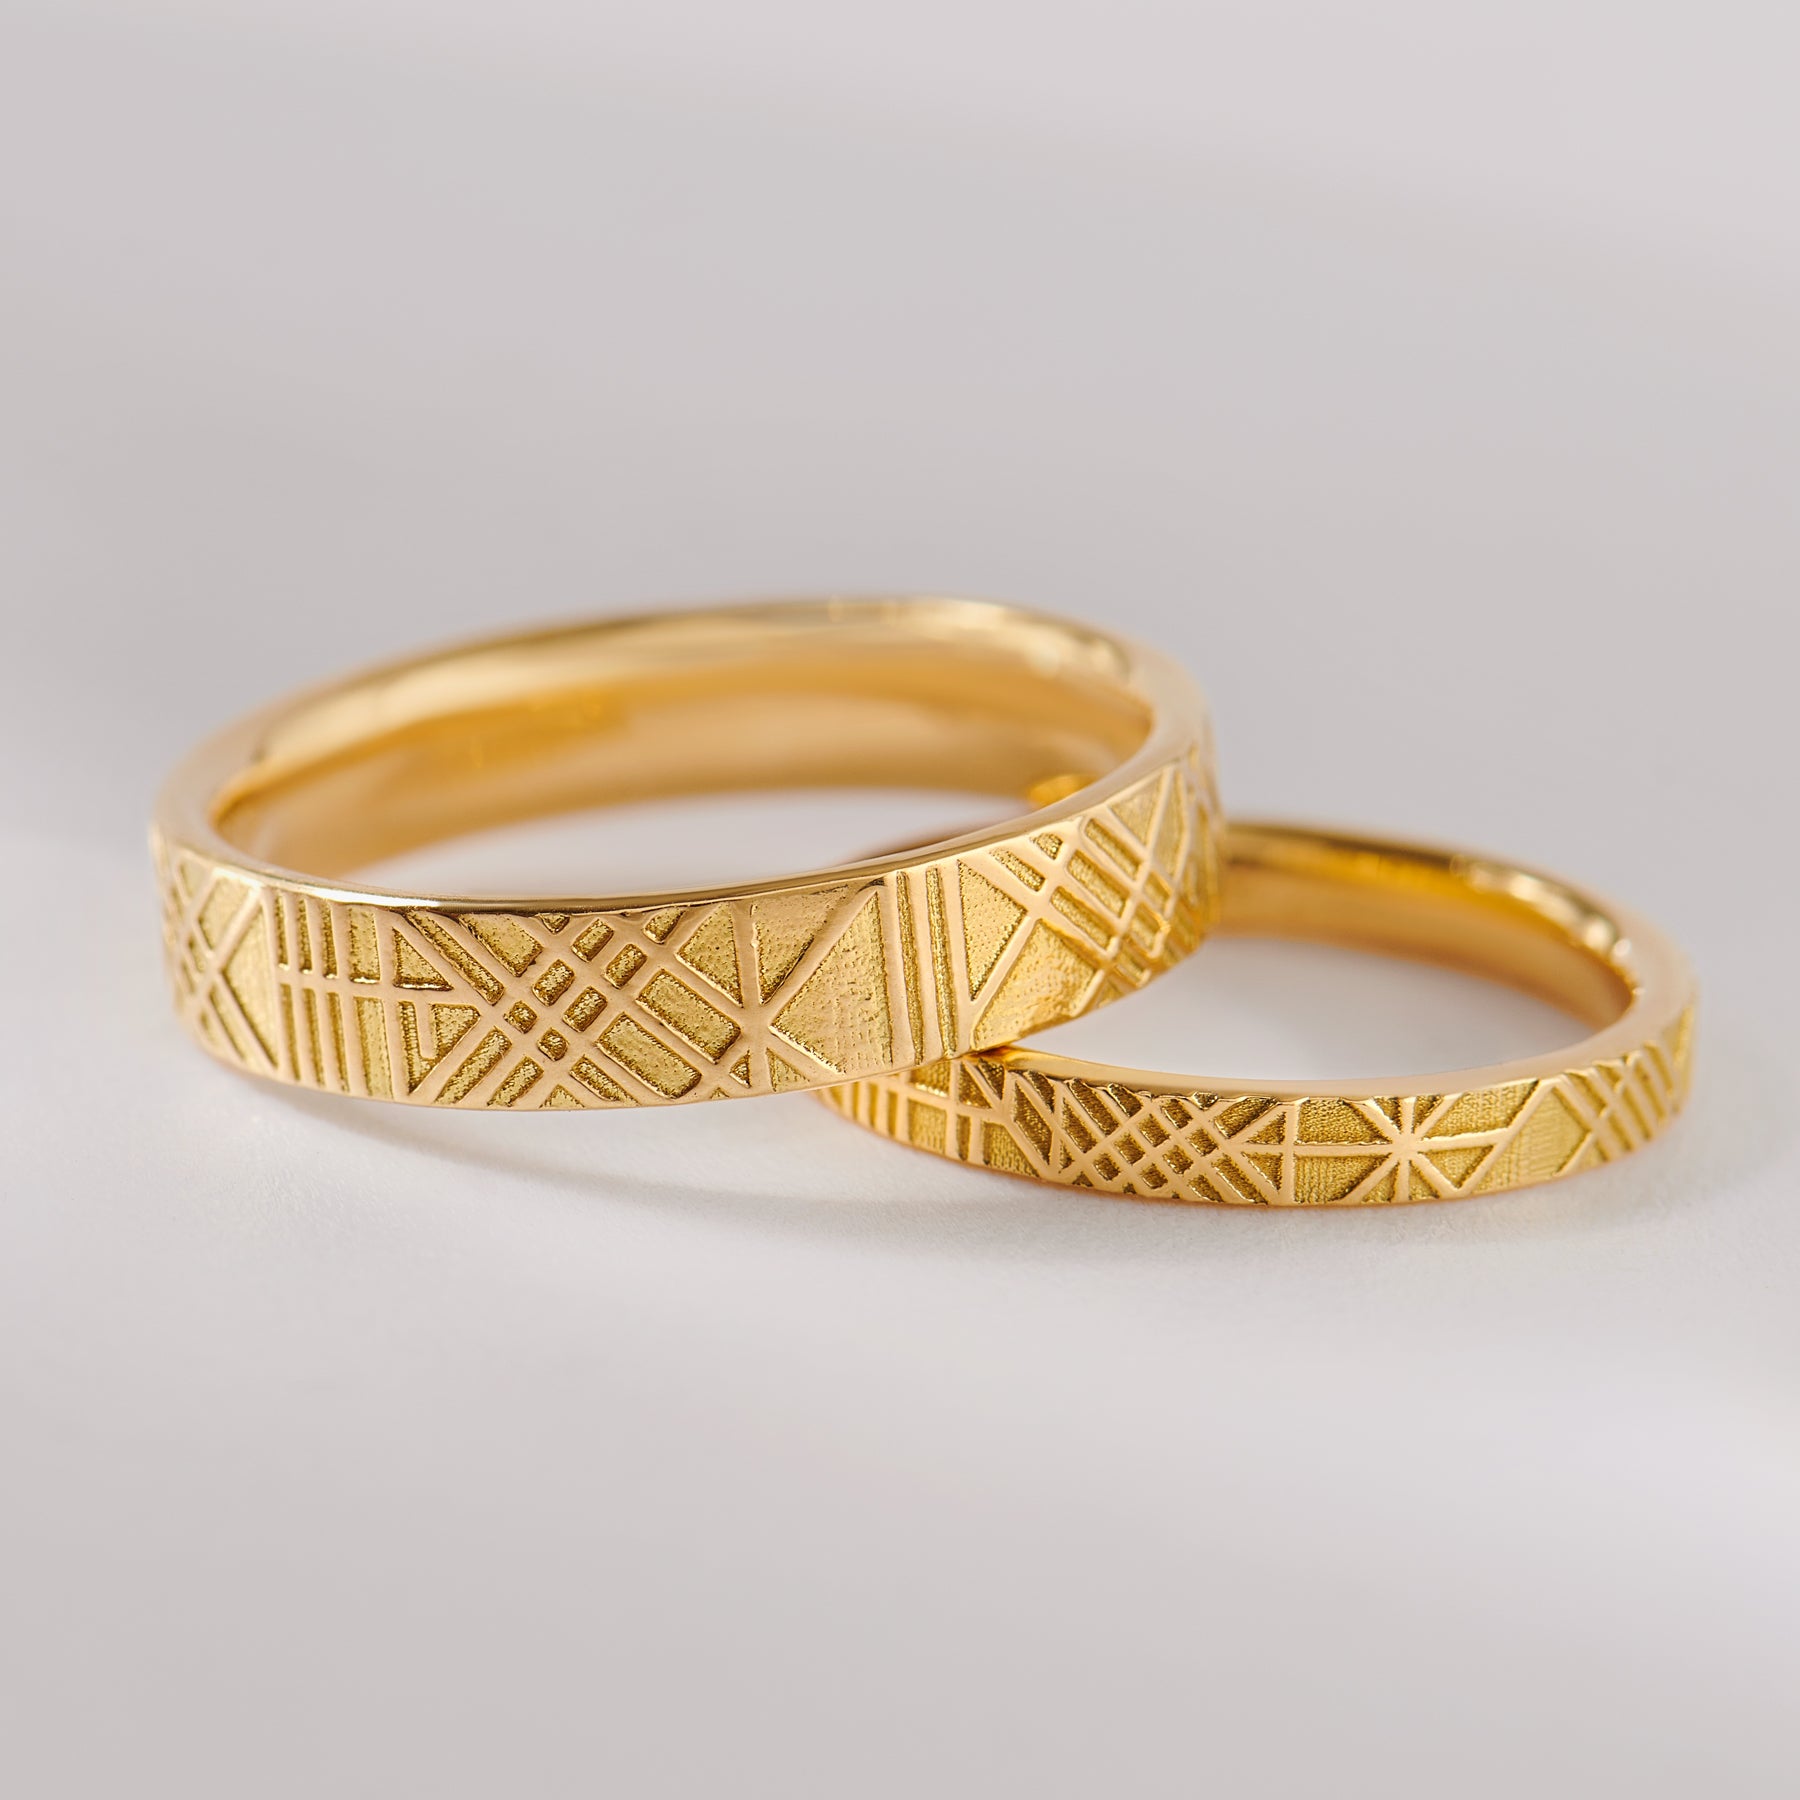 Wedding bands sets. His and hers bands. Gold wedding rings